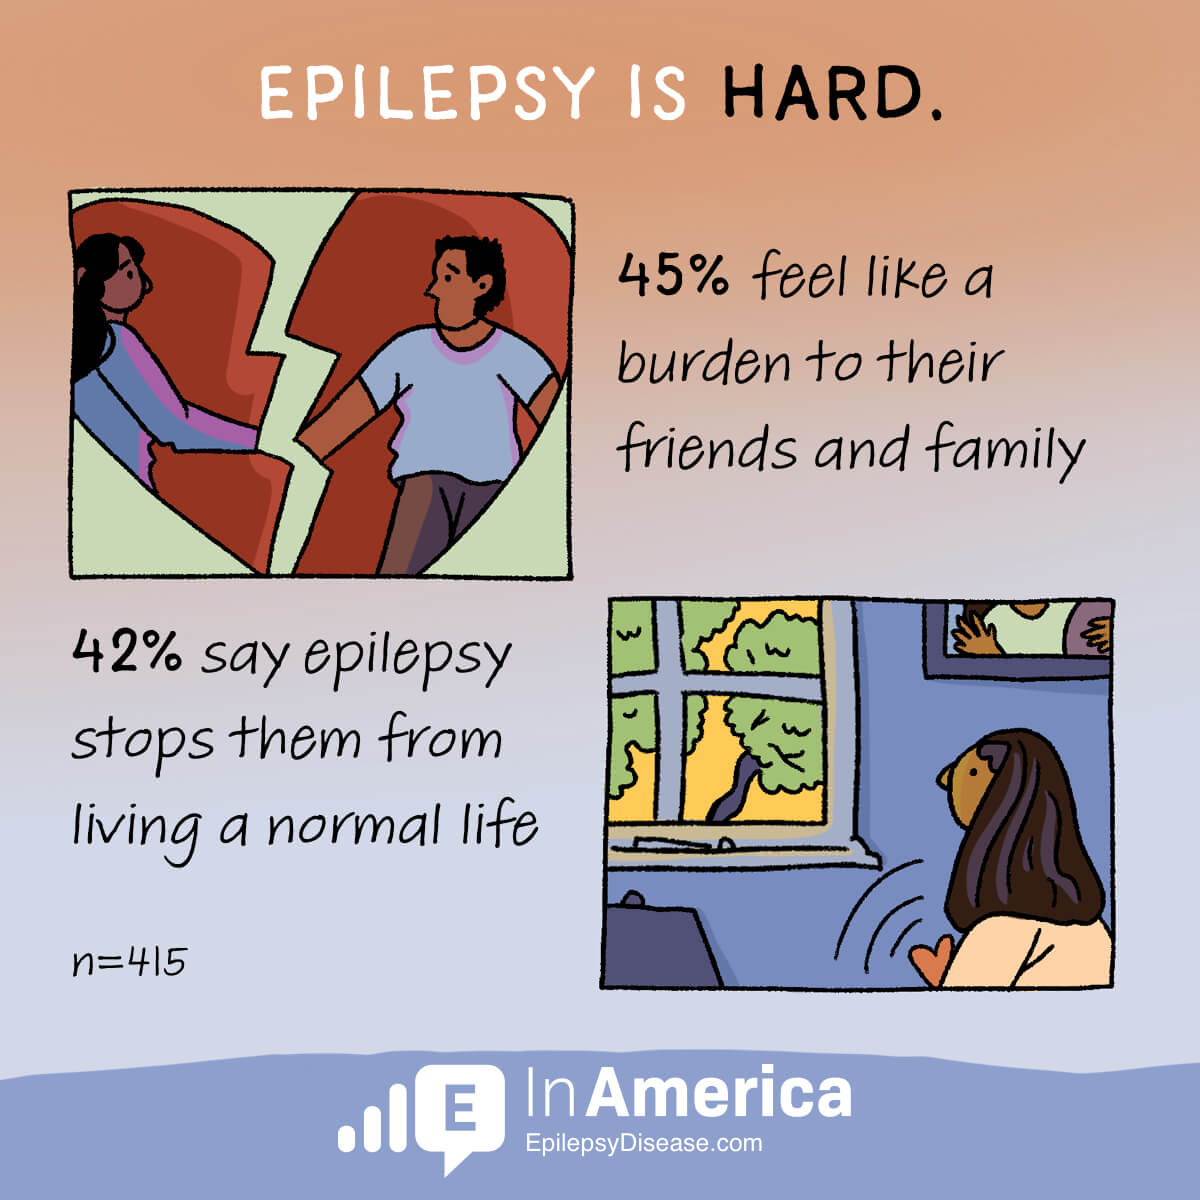 45% feel like a burden to their family and friends. 42% say epilepsy stops them from living a normal life.